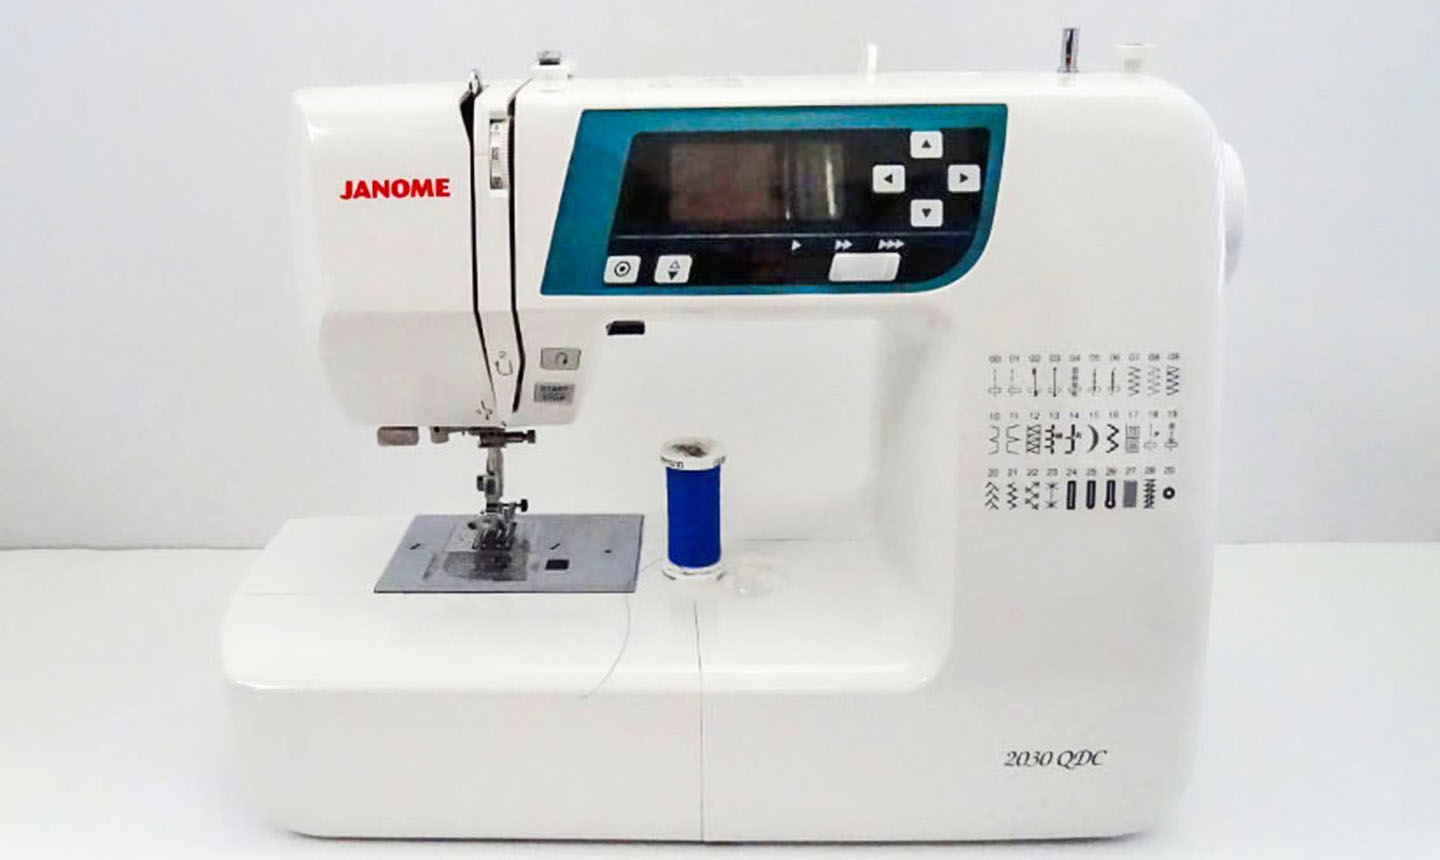 How I Fix My Machine: Your Janome Craftsy